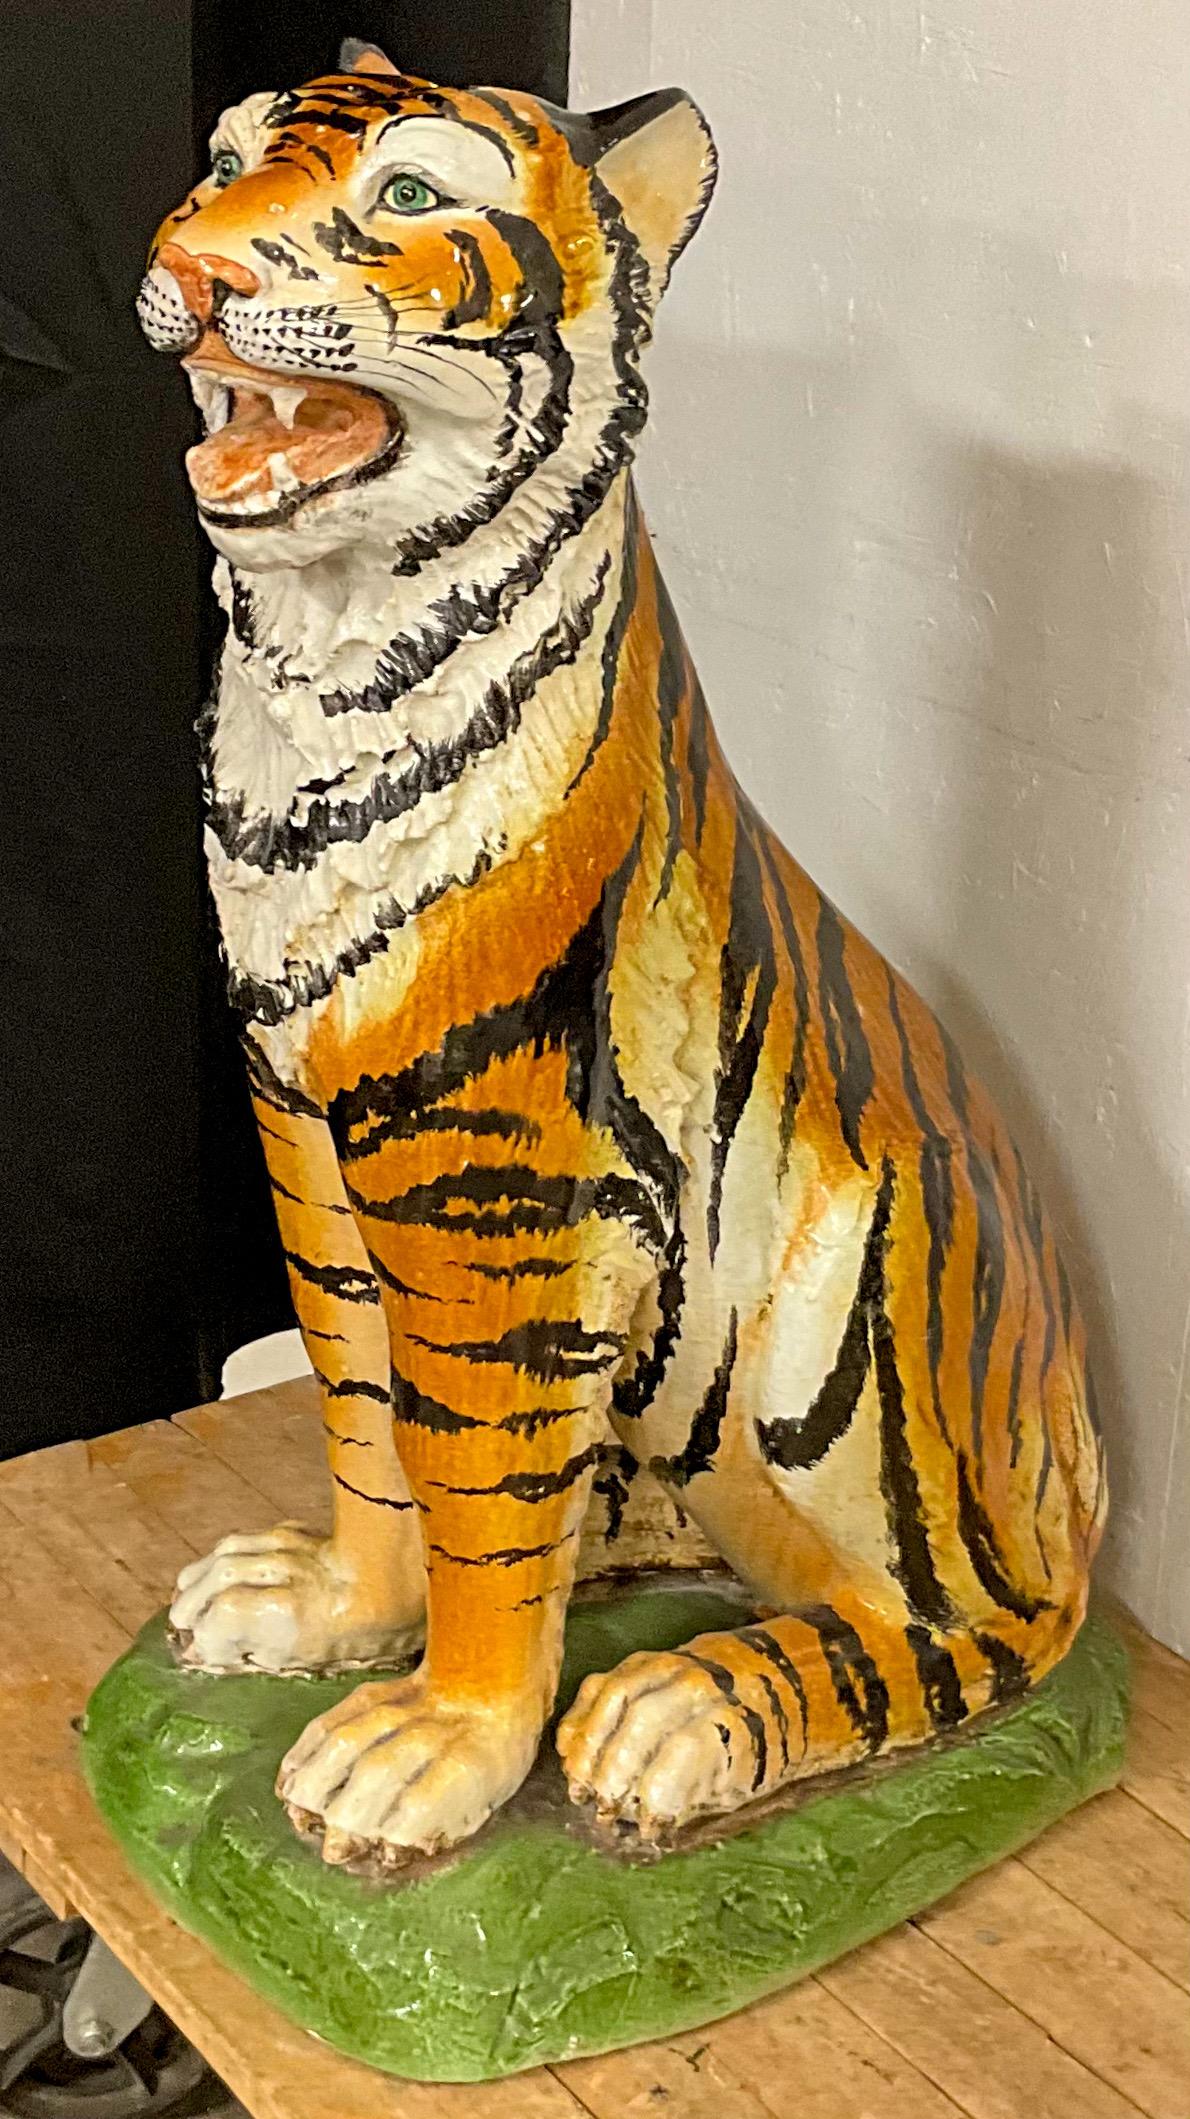 This is a Hollywood Regency Era monumental signed Italian terracotta tiger statue / figurine. It is signed and dated. The tiger has a vibrant majolica glaze and is hand painted. He is in very good condition.

My shipping is for the Continental US